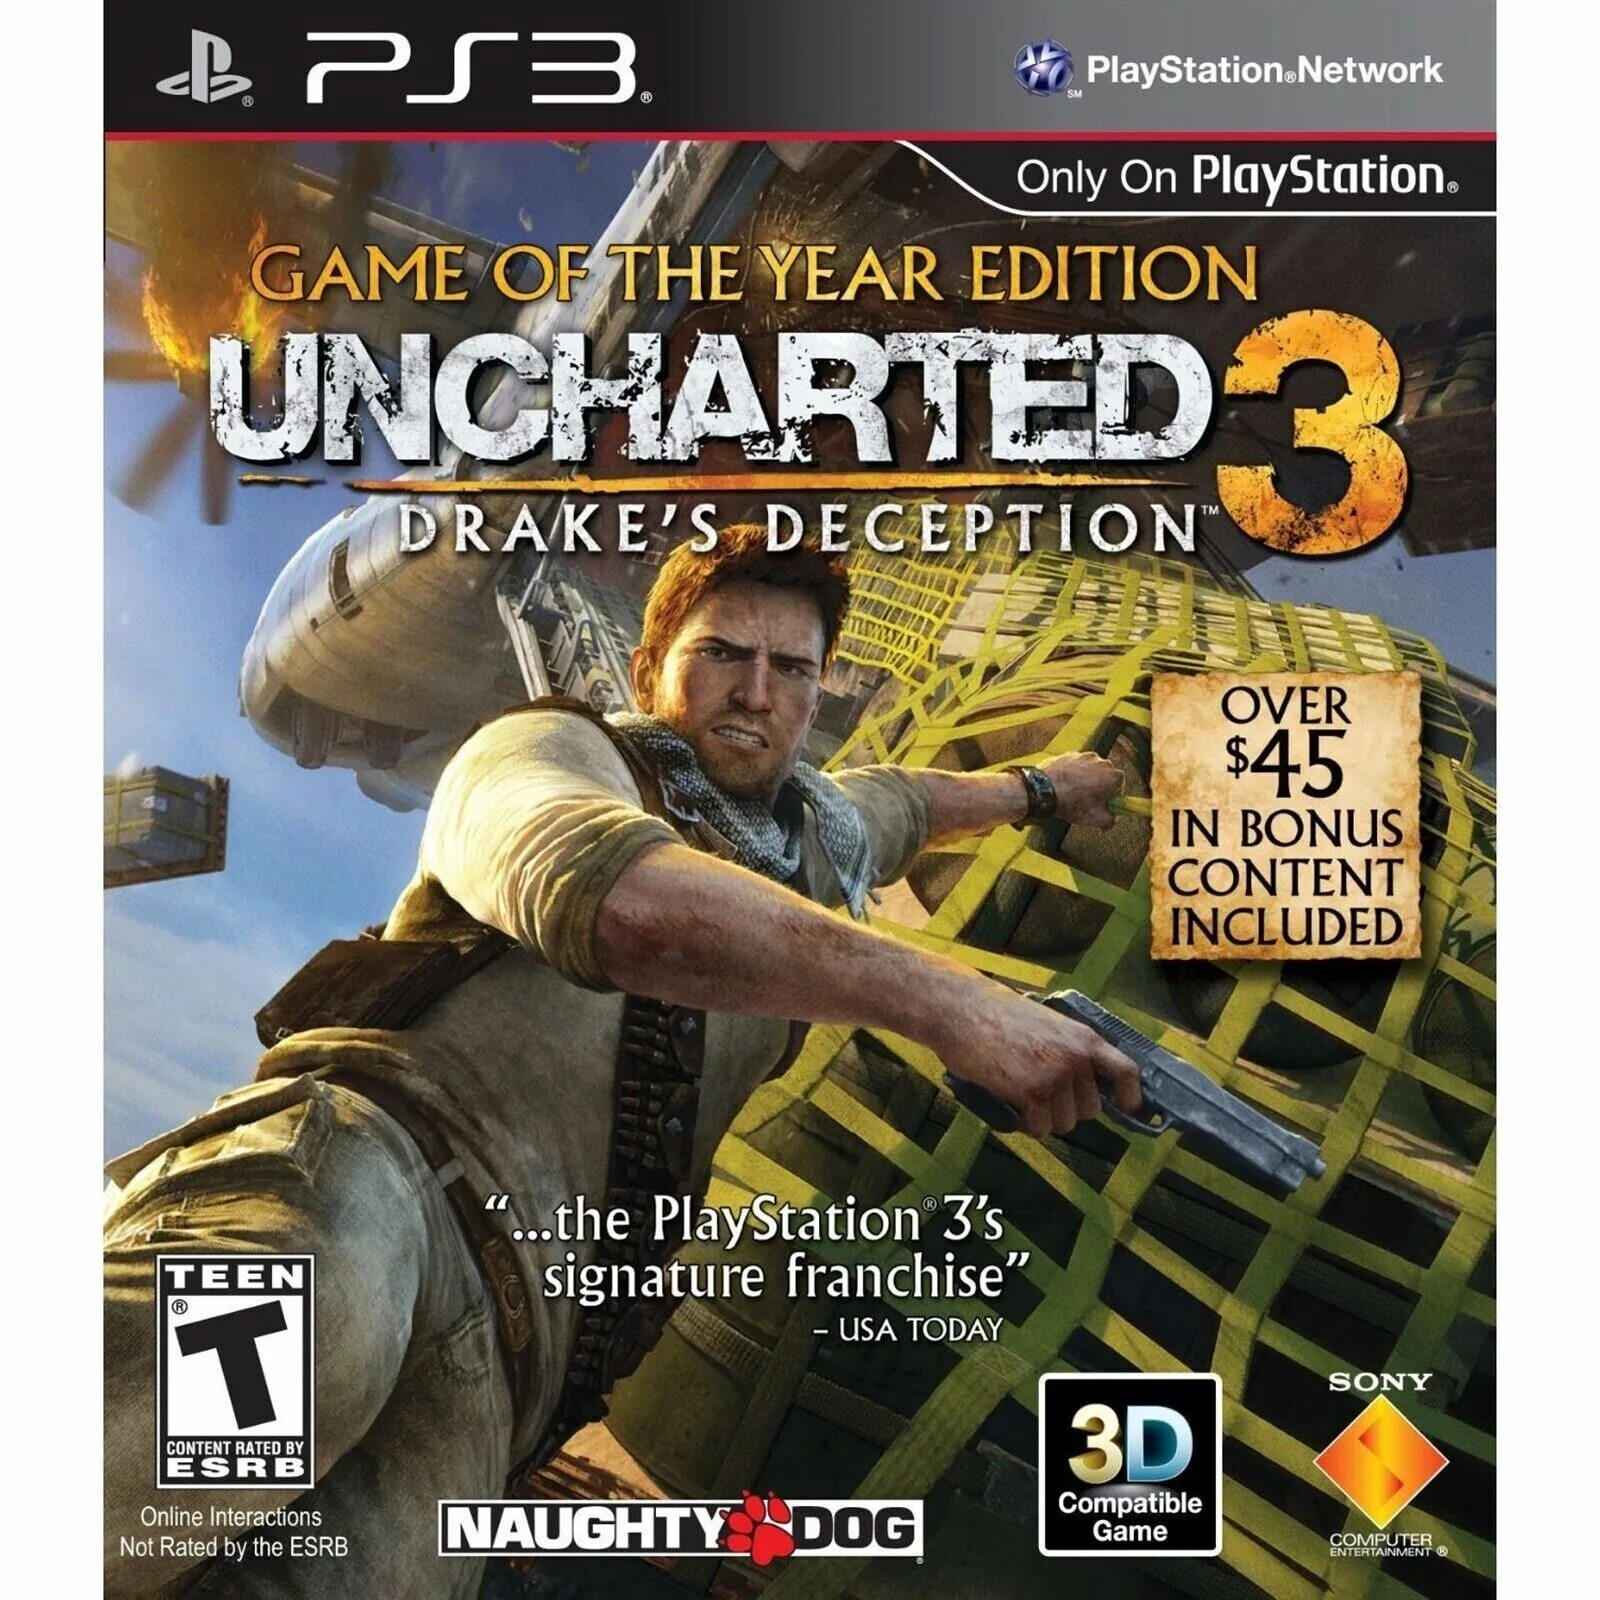 Uncharted 3 ps3. Uncharted игра на пс3. Uncharted 3 иллюзии Дрейка ps3. Uncharted 3 ps3 диск. Игры game of the year edition